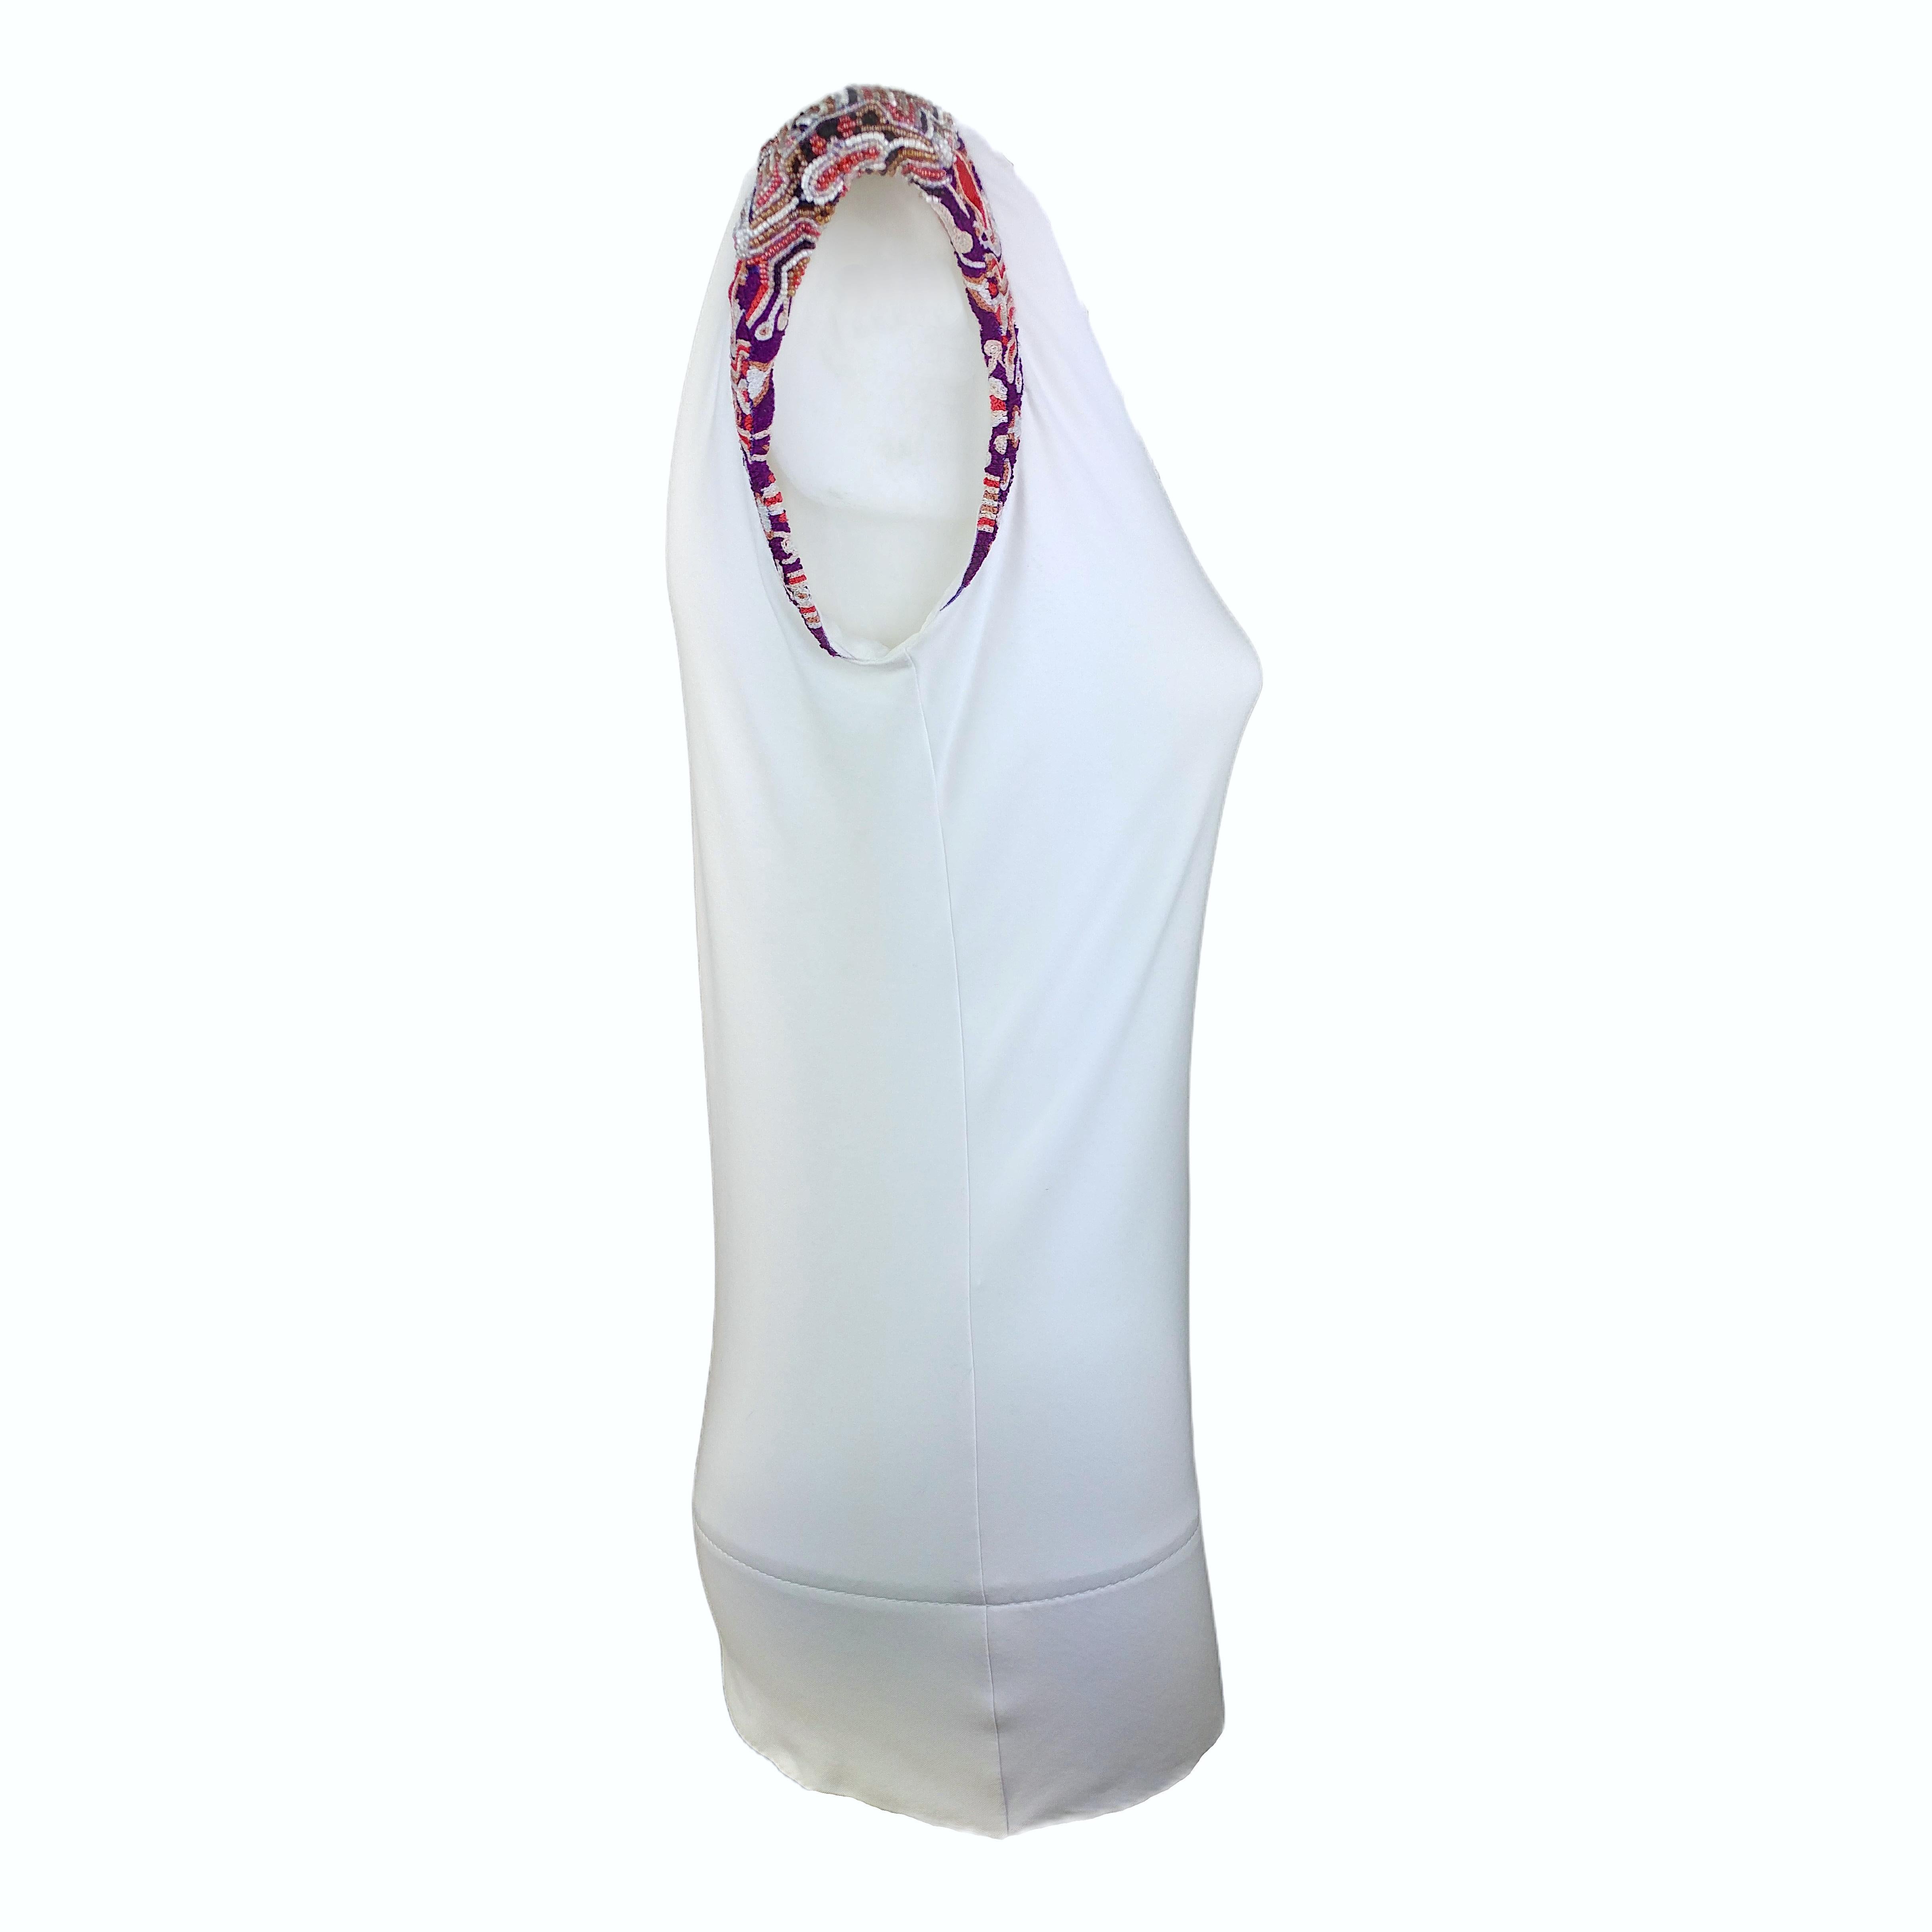 Here's a Genuine Fendi White Top from the early years 2000, designed by Carla Fendi. It has a mock neckline and shoulder pads 1.5 cm high. The shoulders are completely covered by a refined arabesque pattern made of beads.

About the brand - An